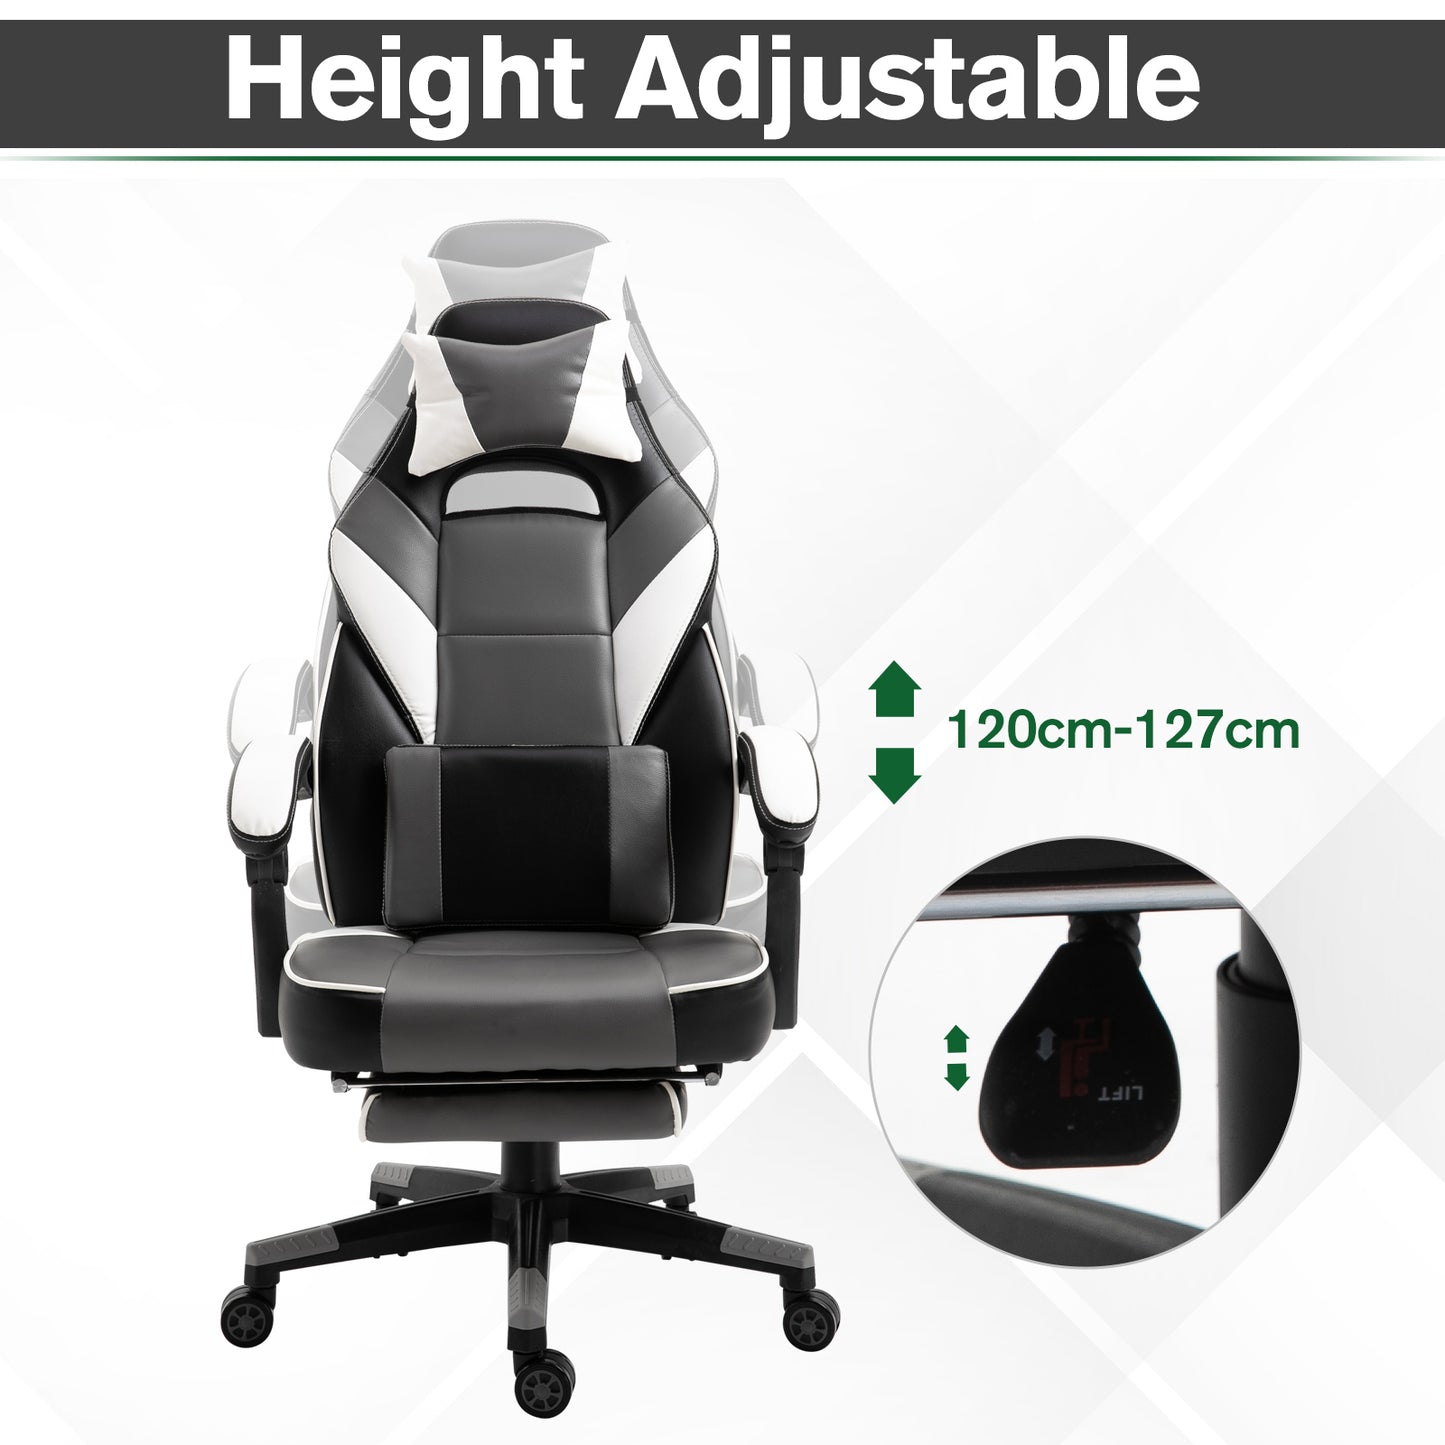 Vinsetto Cool & Stylish Gaming Chair Ergonomic w/ Padding Footrest Neck Back Pillow Adjustable Chair Grey